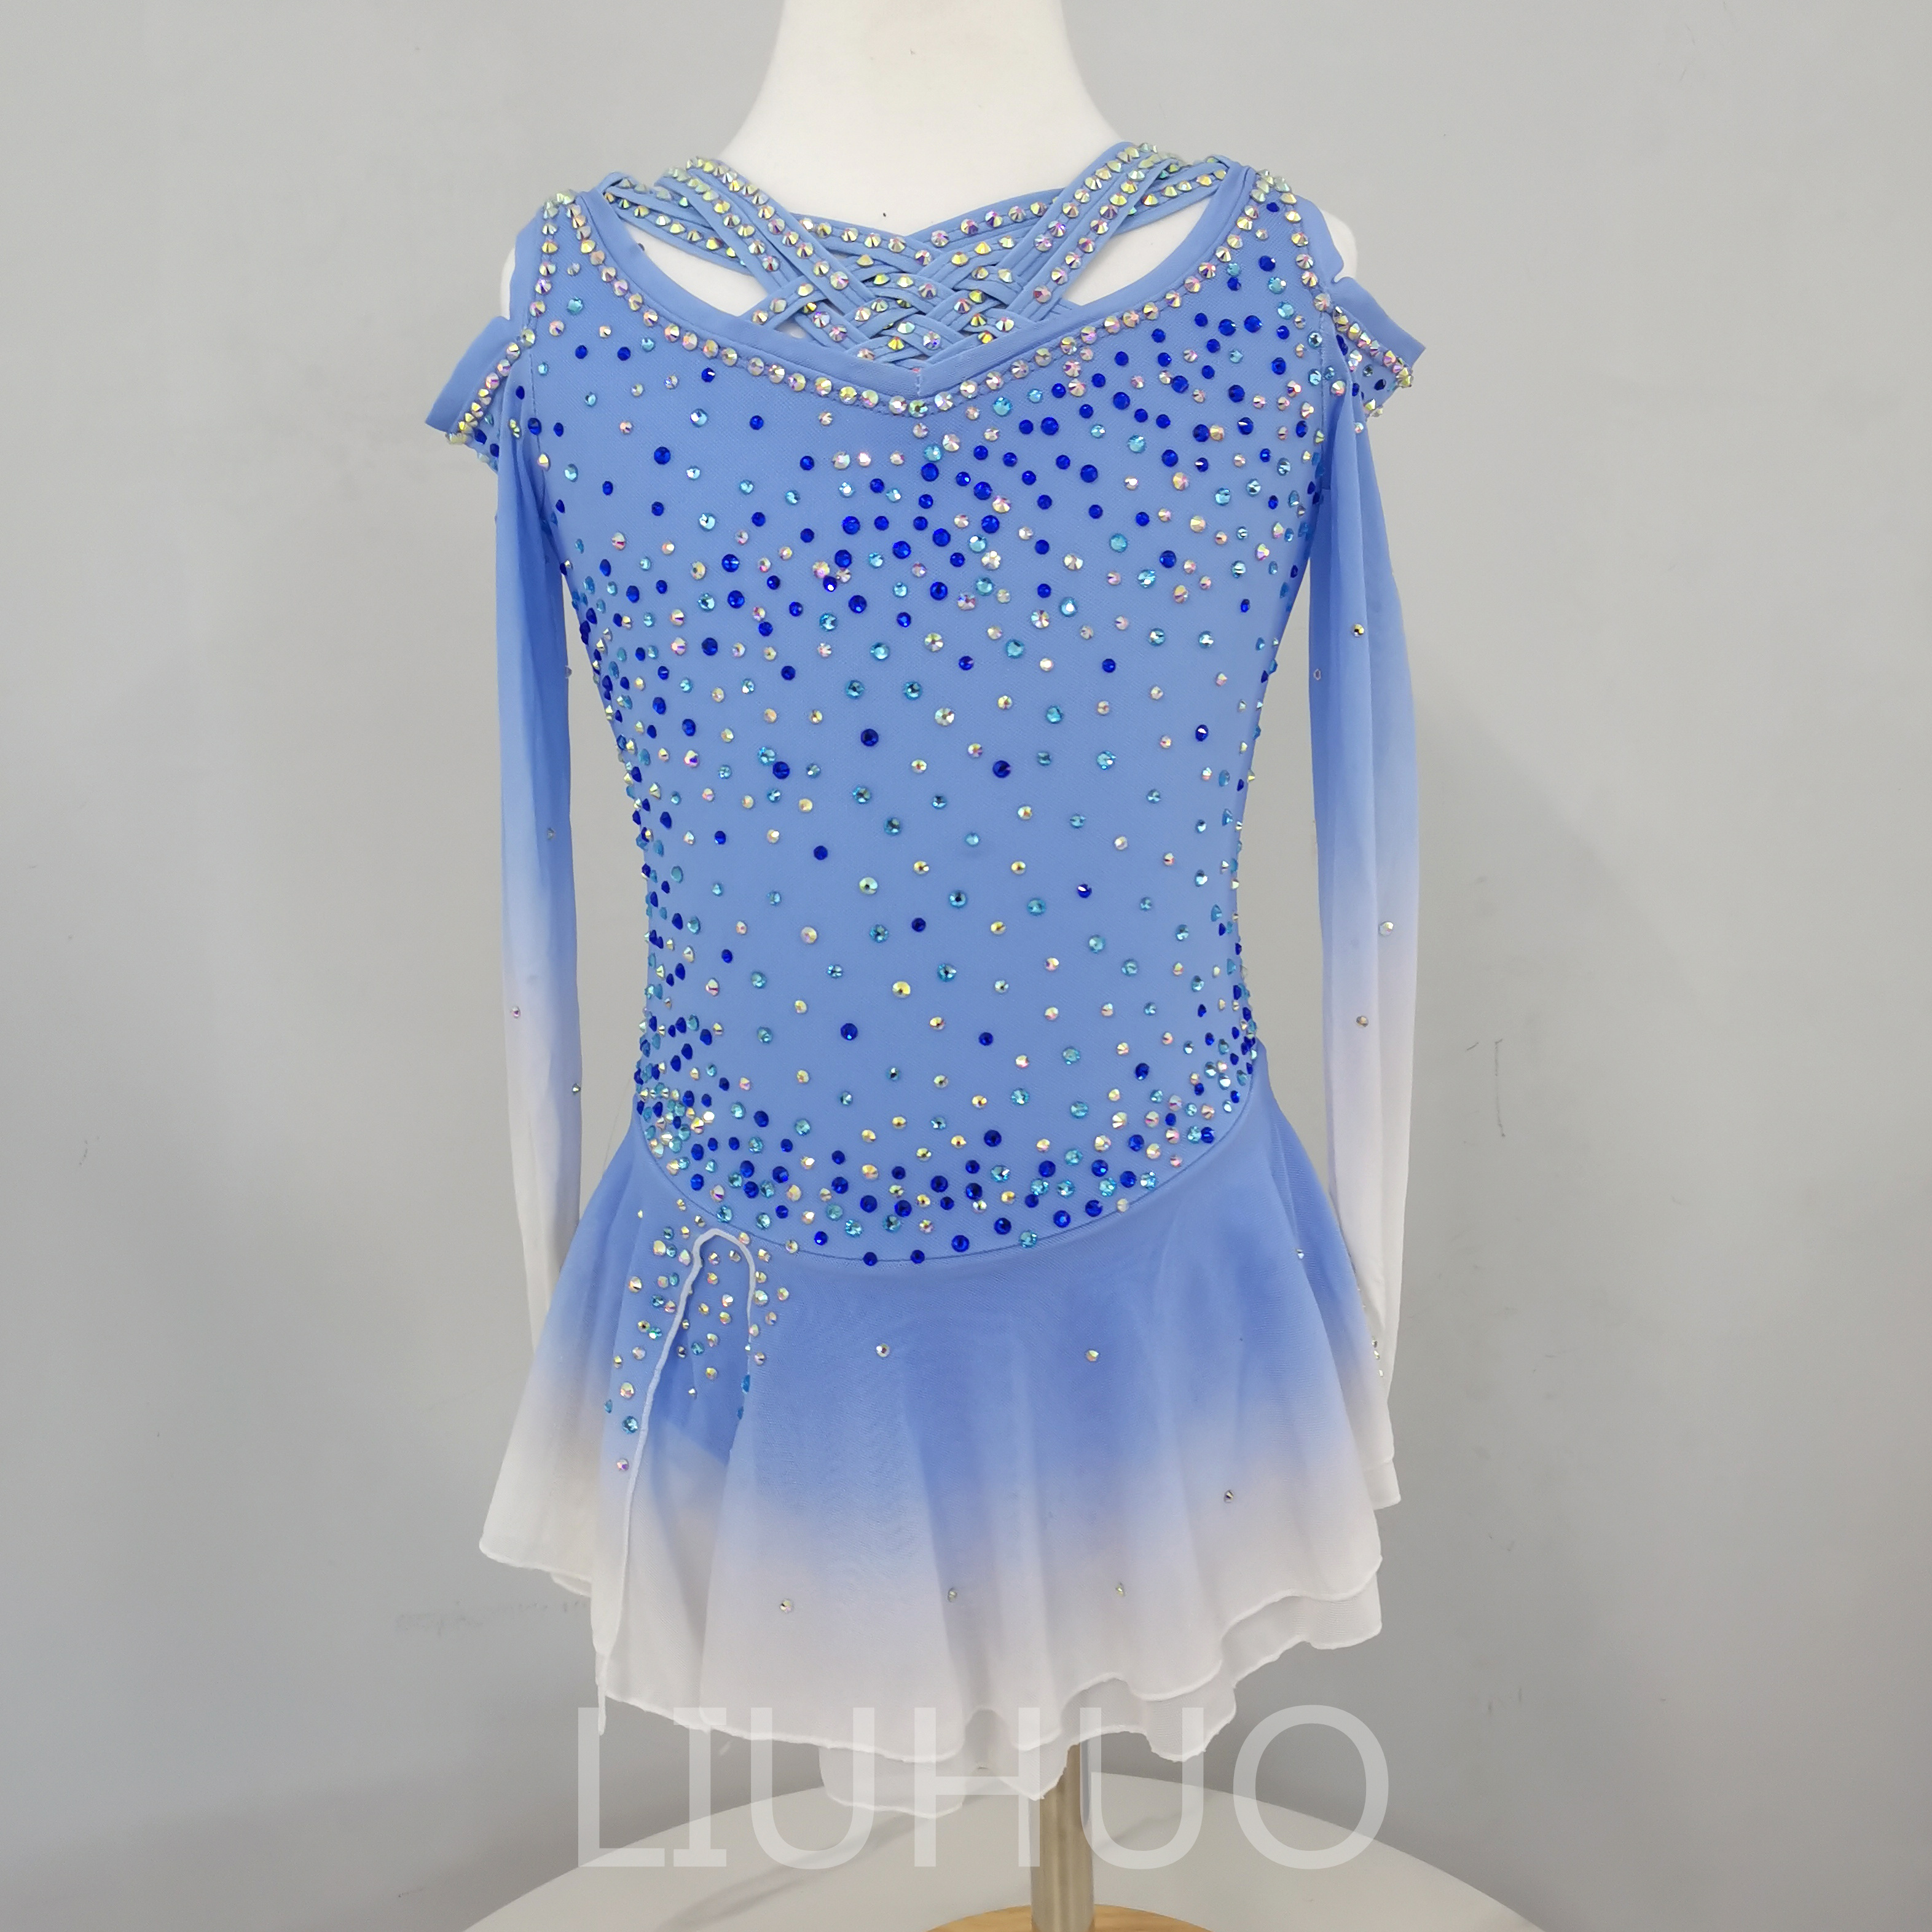 LIUHUO Ice Figure Skating Costumes Children Blue Girls Ice Skating Dress for Competition  Crystals  Long Sleeve